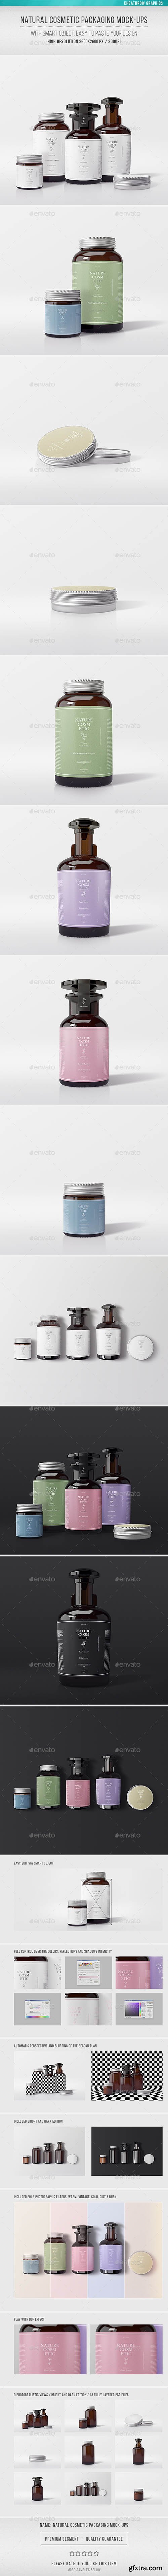 Graphicriver Natural Cosmetic Packaging Mock-Ups 16639138